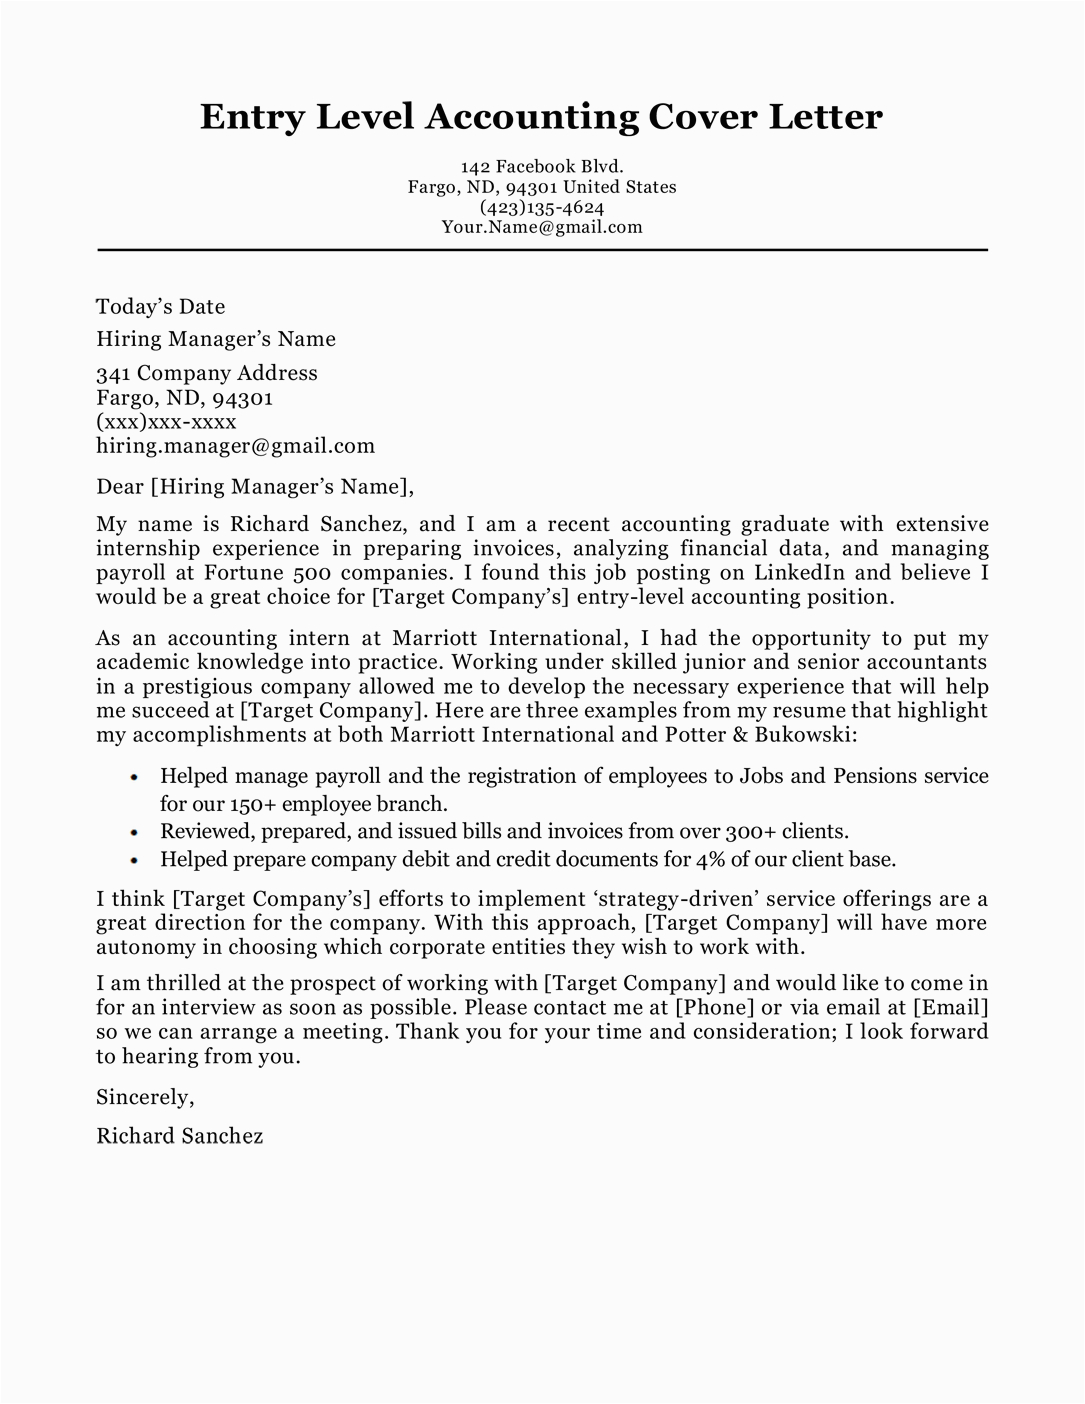 Sample Cover Letter and Resume for Accountant Accounting Cover Letter Sample & Writing Tips